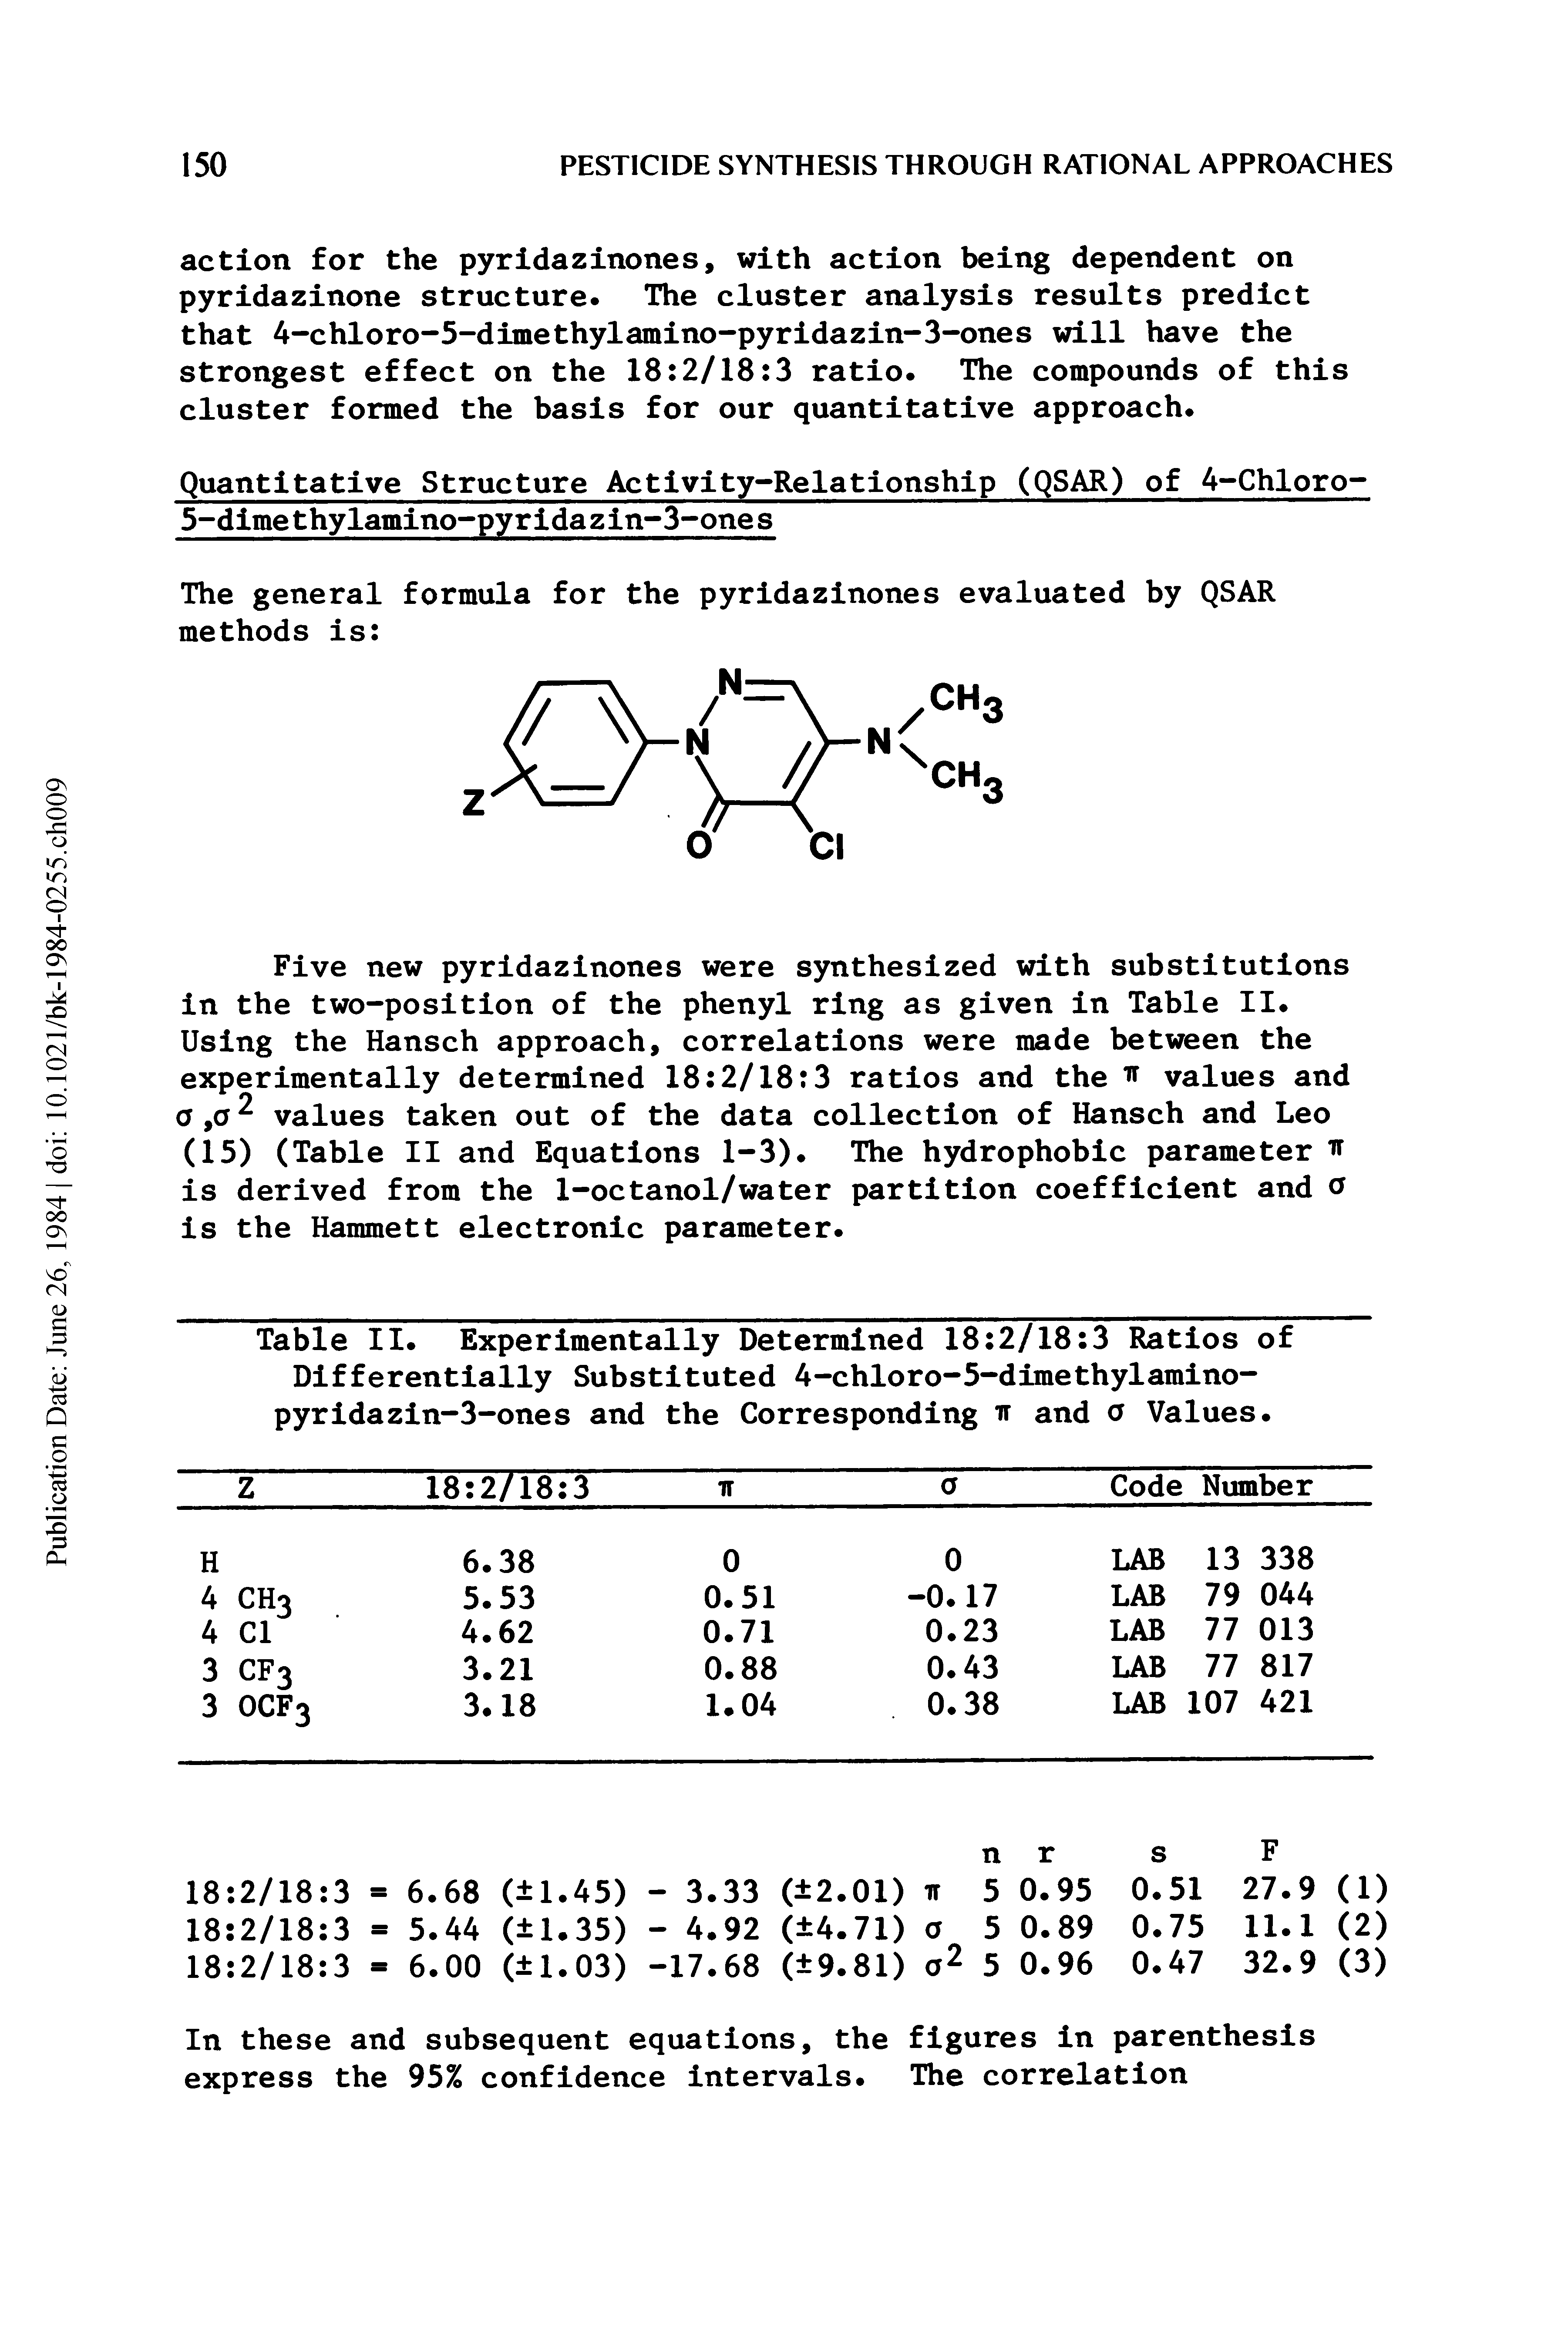 Table II. Experimentally Determined 18 2/18 3 Ratios of Differentially Substituted 4-chloro-5-dimethylamino-pyridazin-3-ones and the Corresponding and o Values.